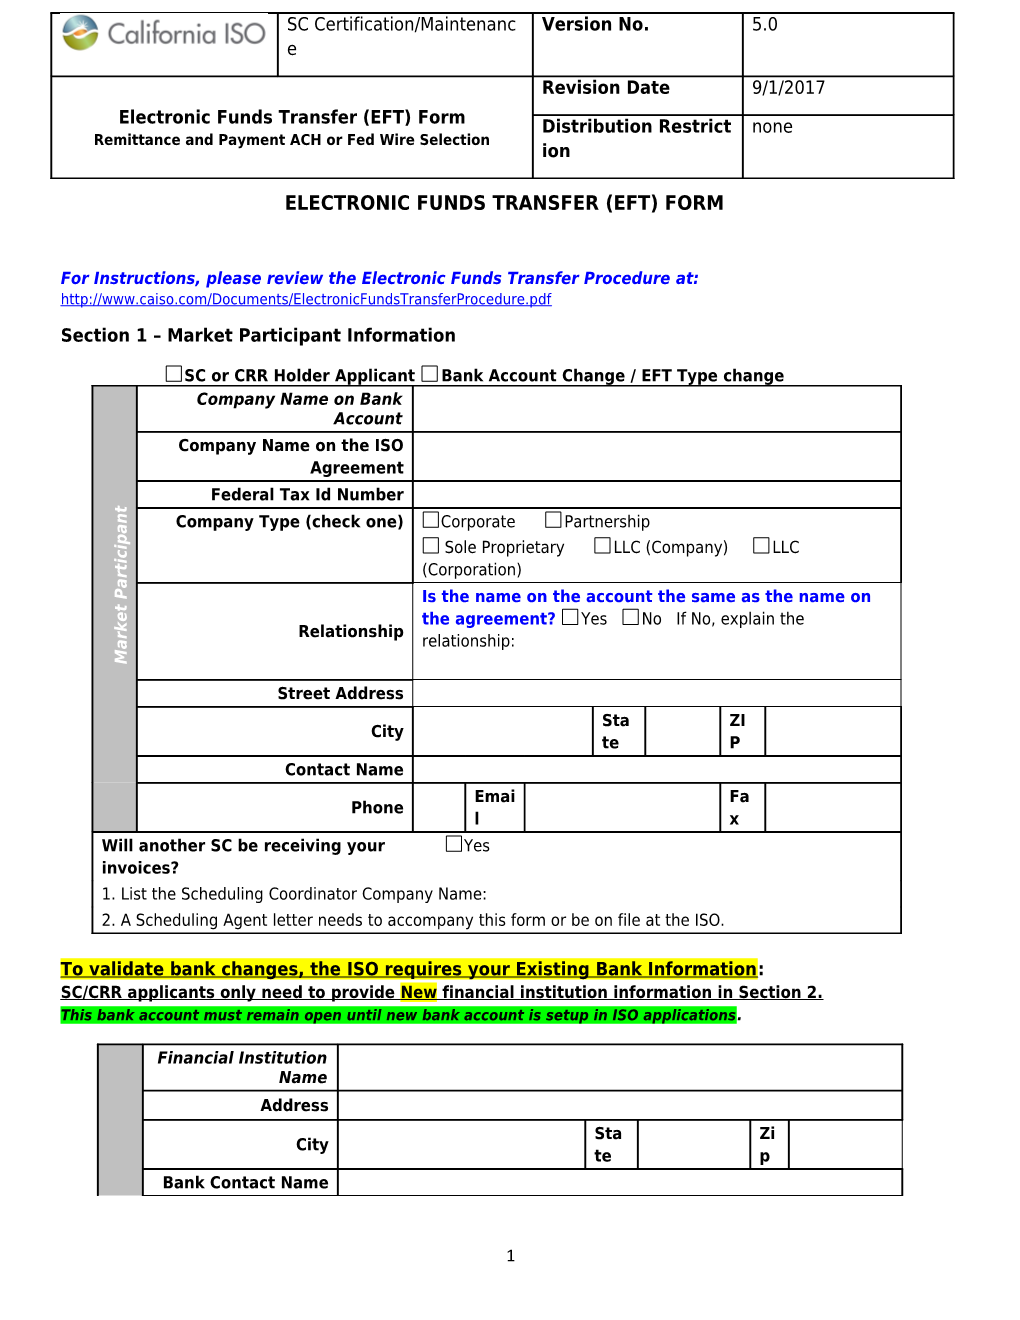 Electronic Funds Transfer Or Bank Account Change Form